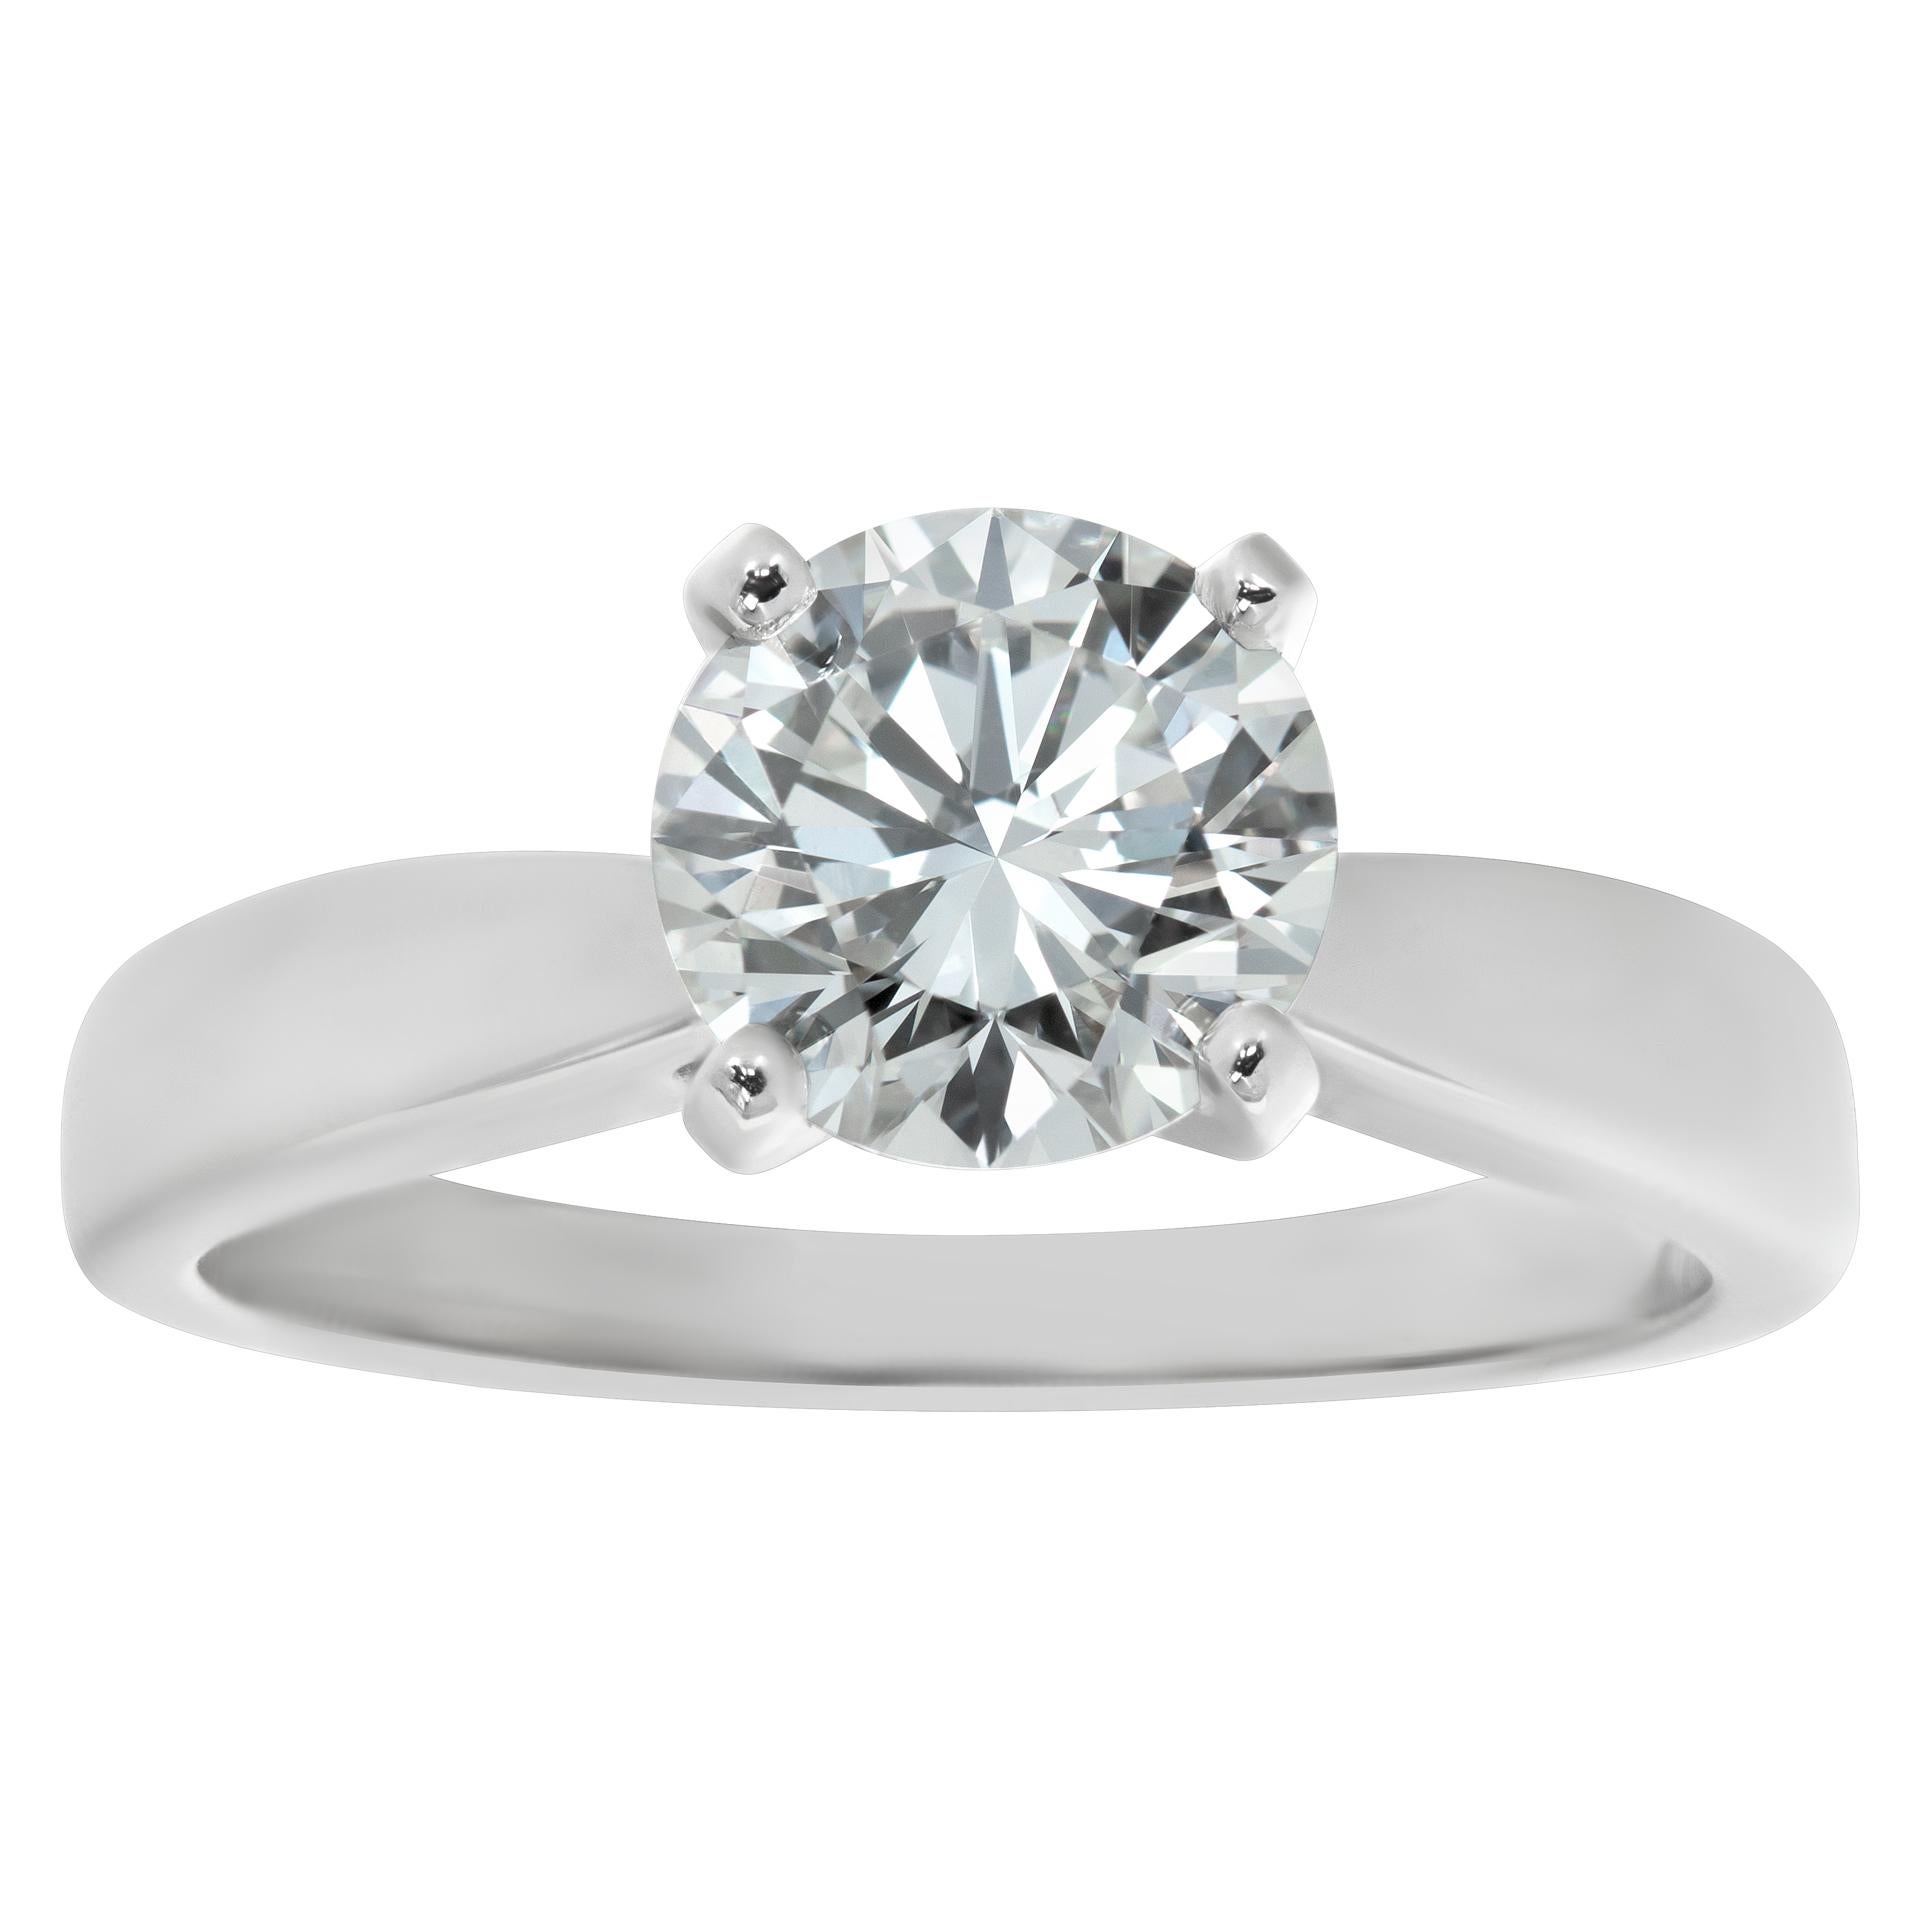 GIA certified round brilliant cut 1.78 carat diamond (I color, VS1 clarity) ring For Sale